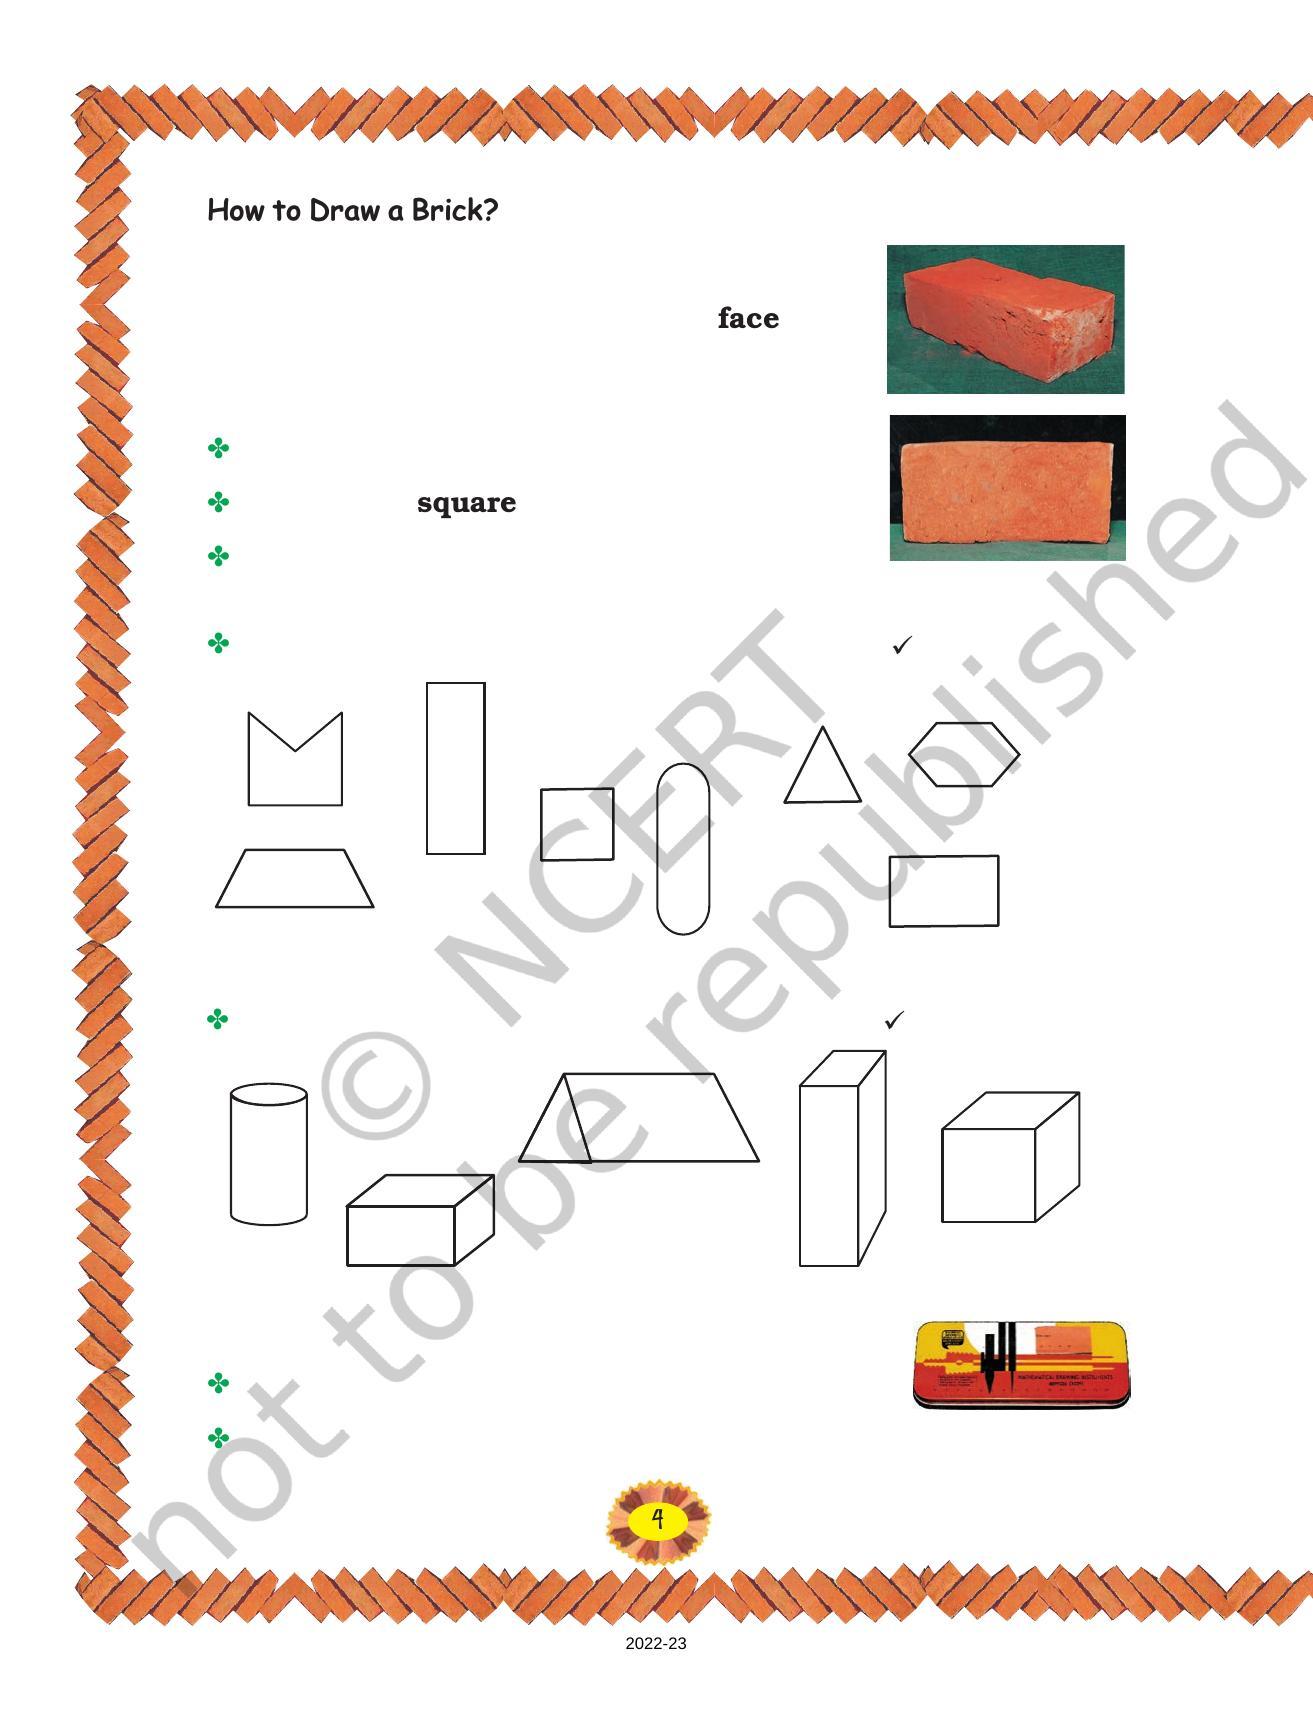 NCERT Book for Class 4 Maths Chapter 1 Building with Bricks - Page 4